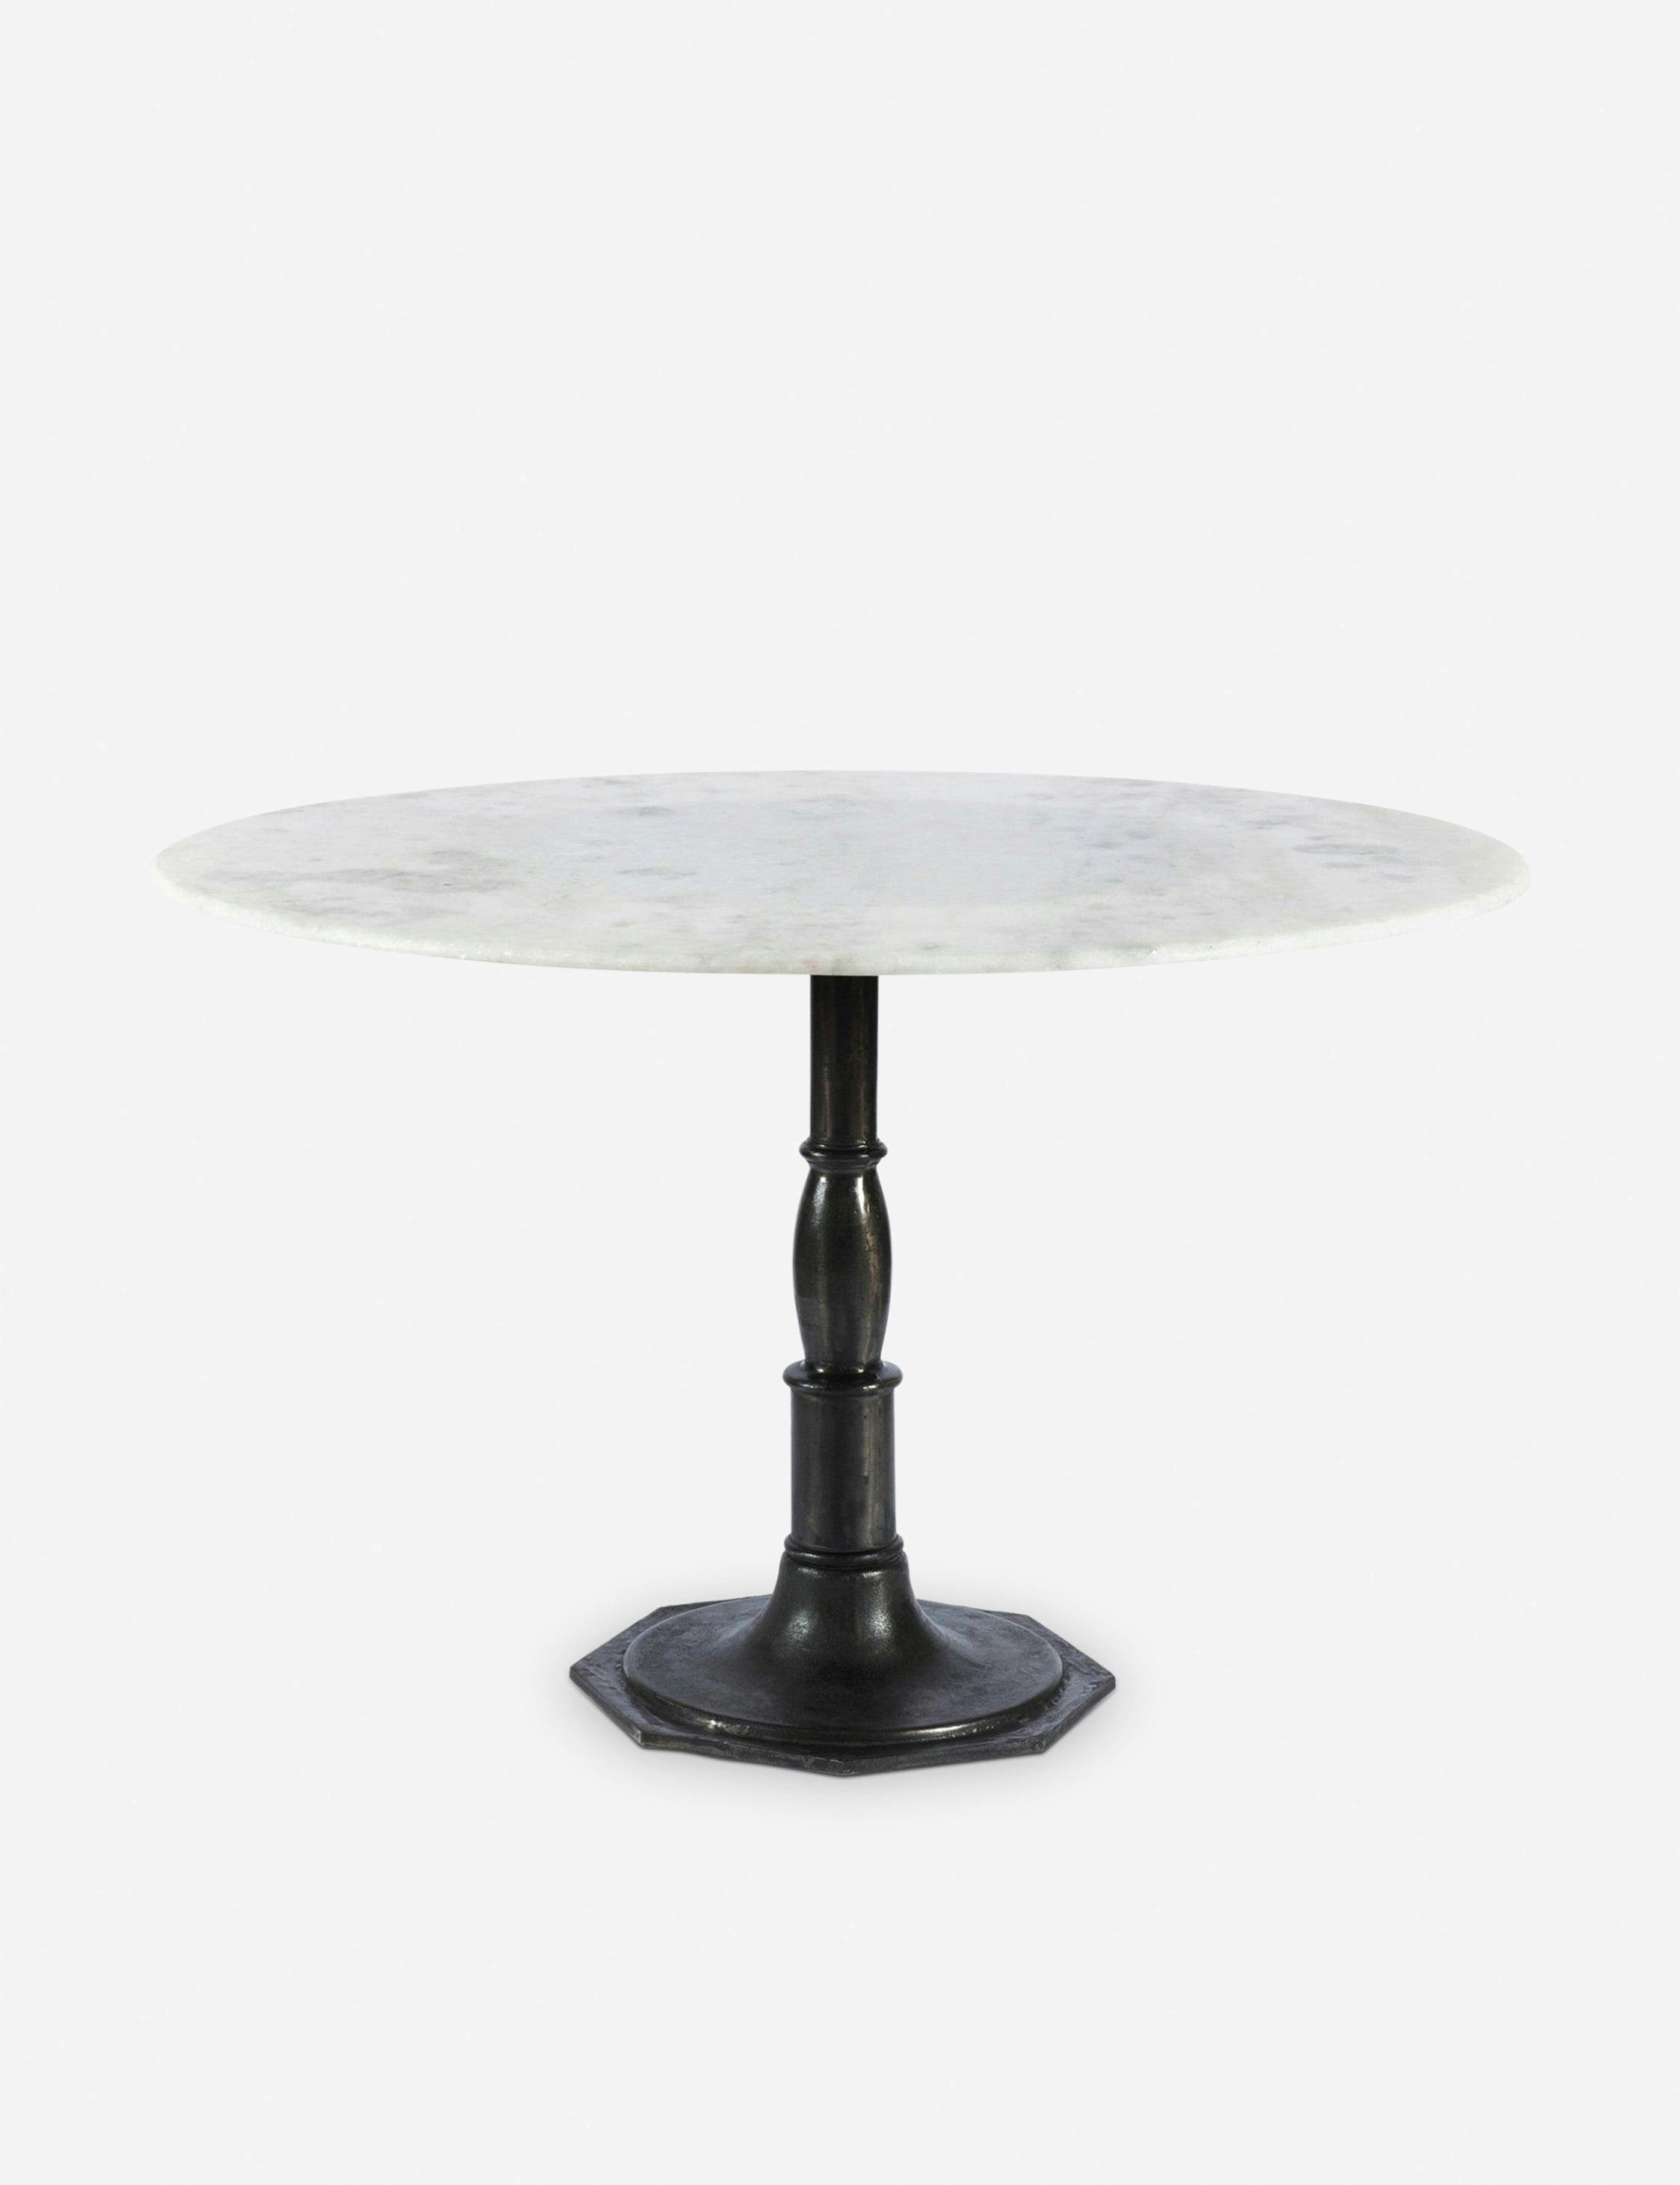 Victoria 48" French White Marble Top Round Dining Table